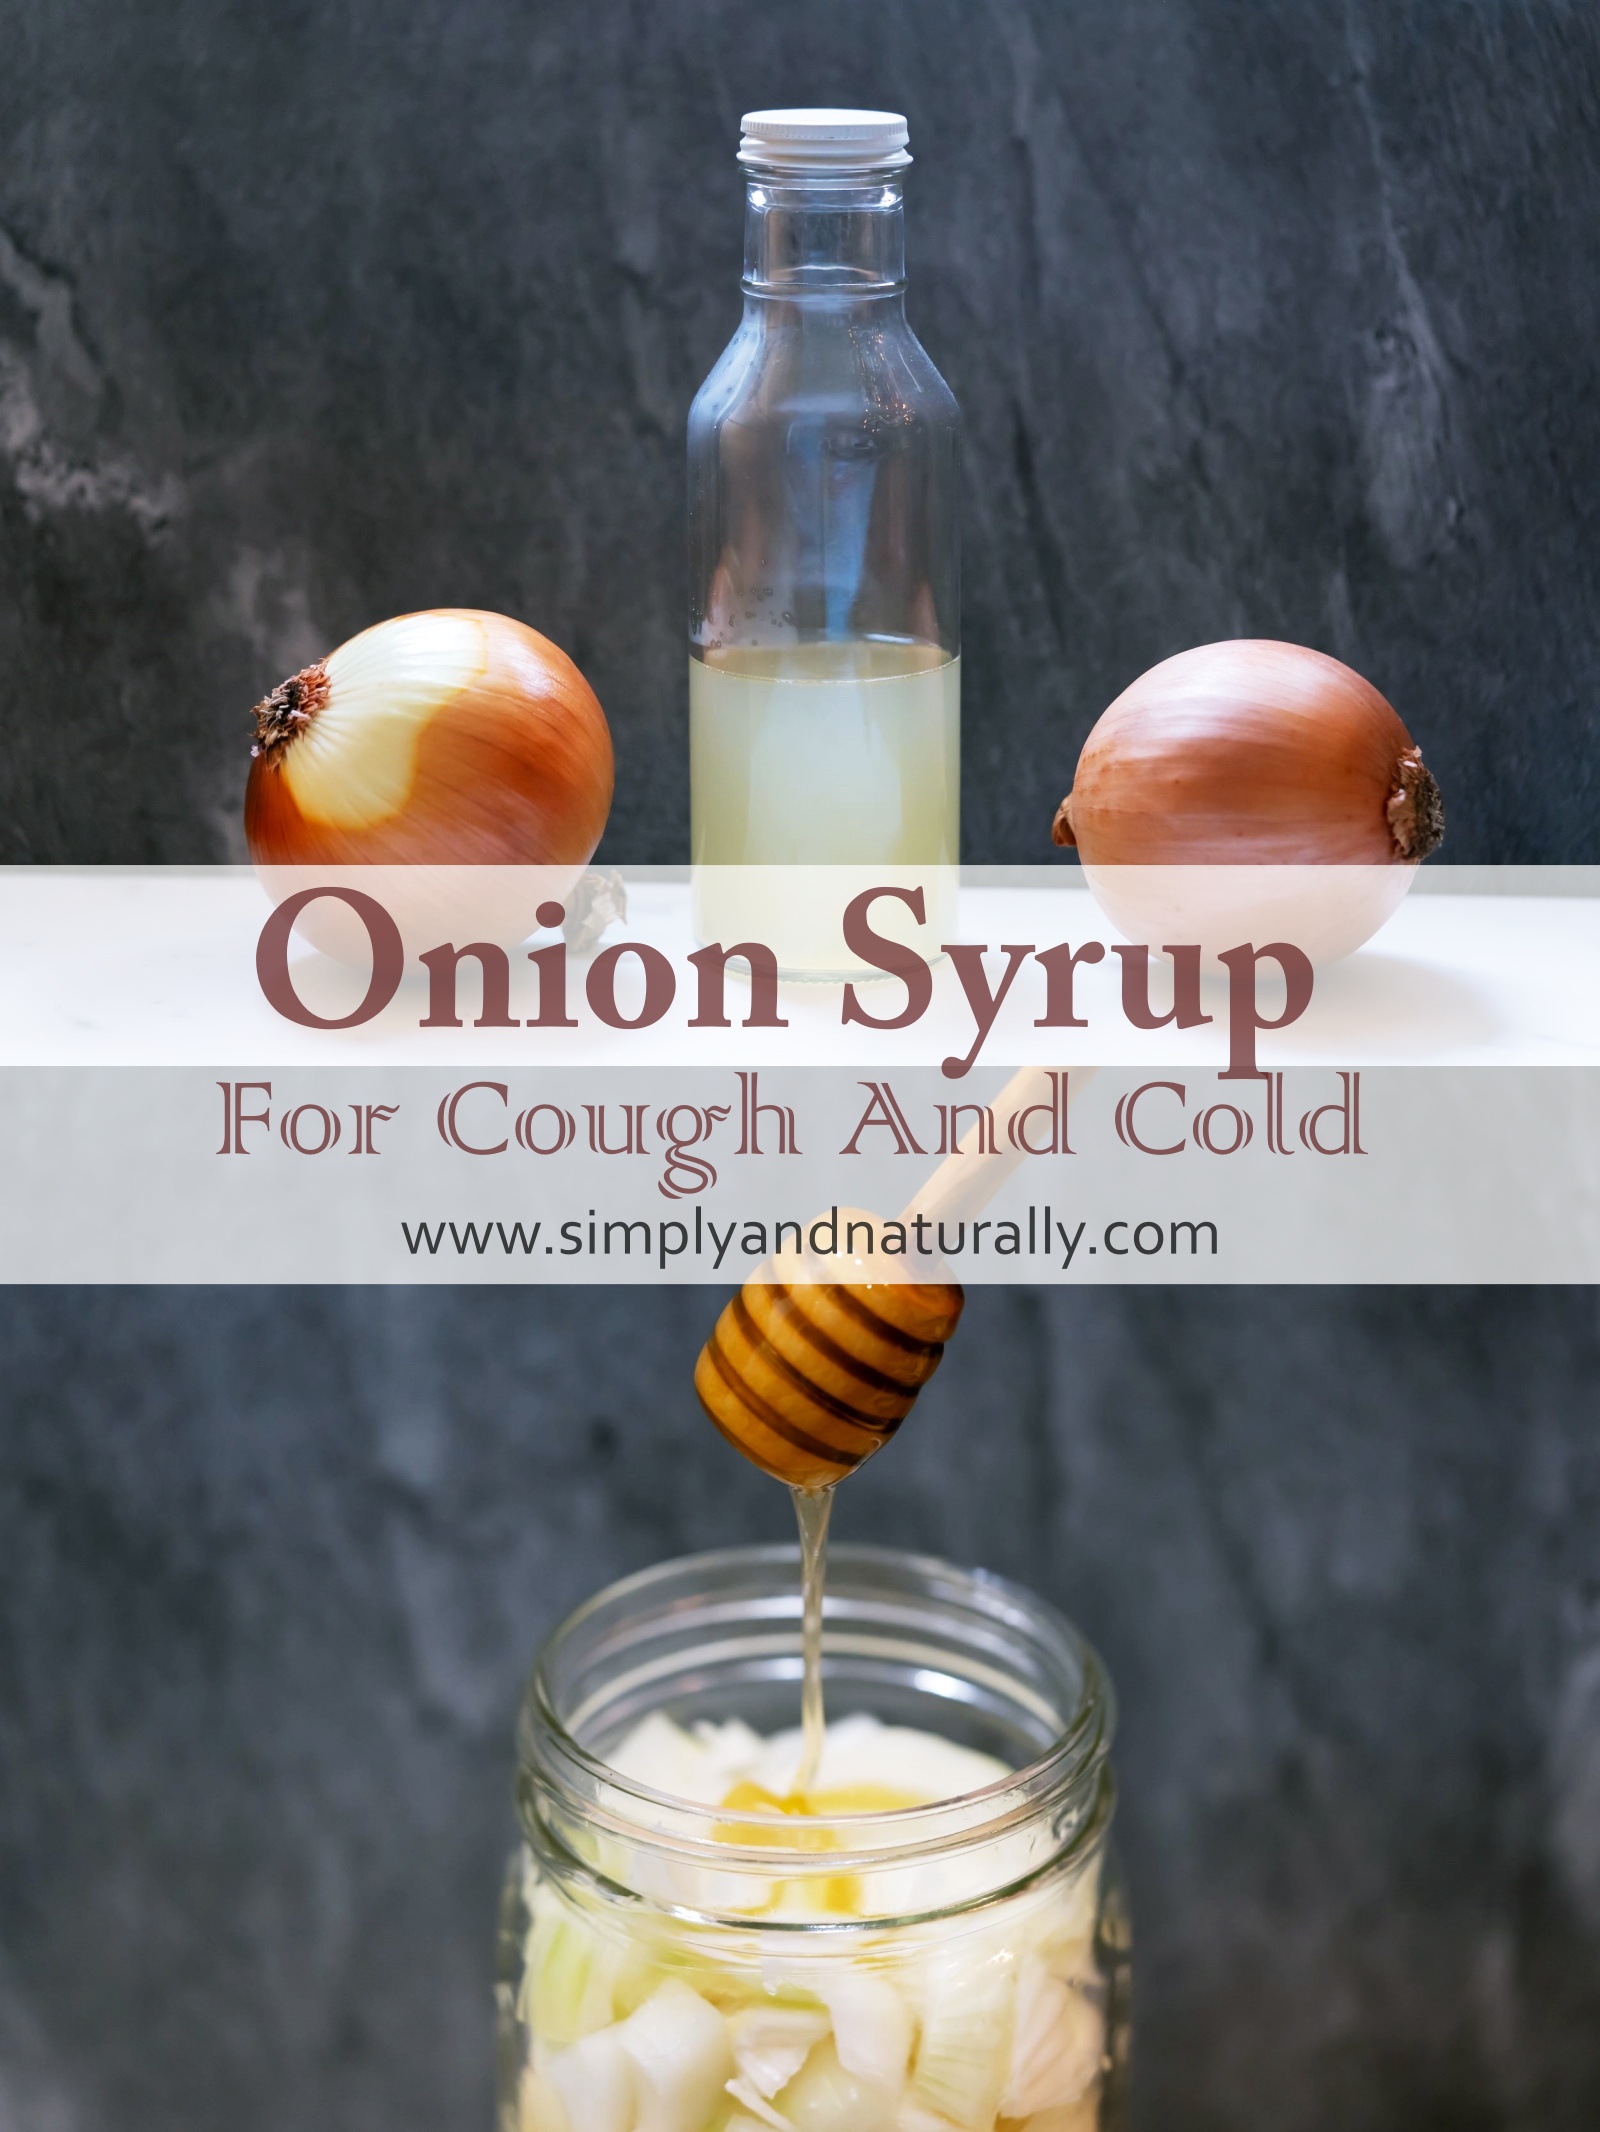 Onion Syrup For Cough And Cold